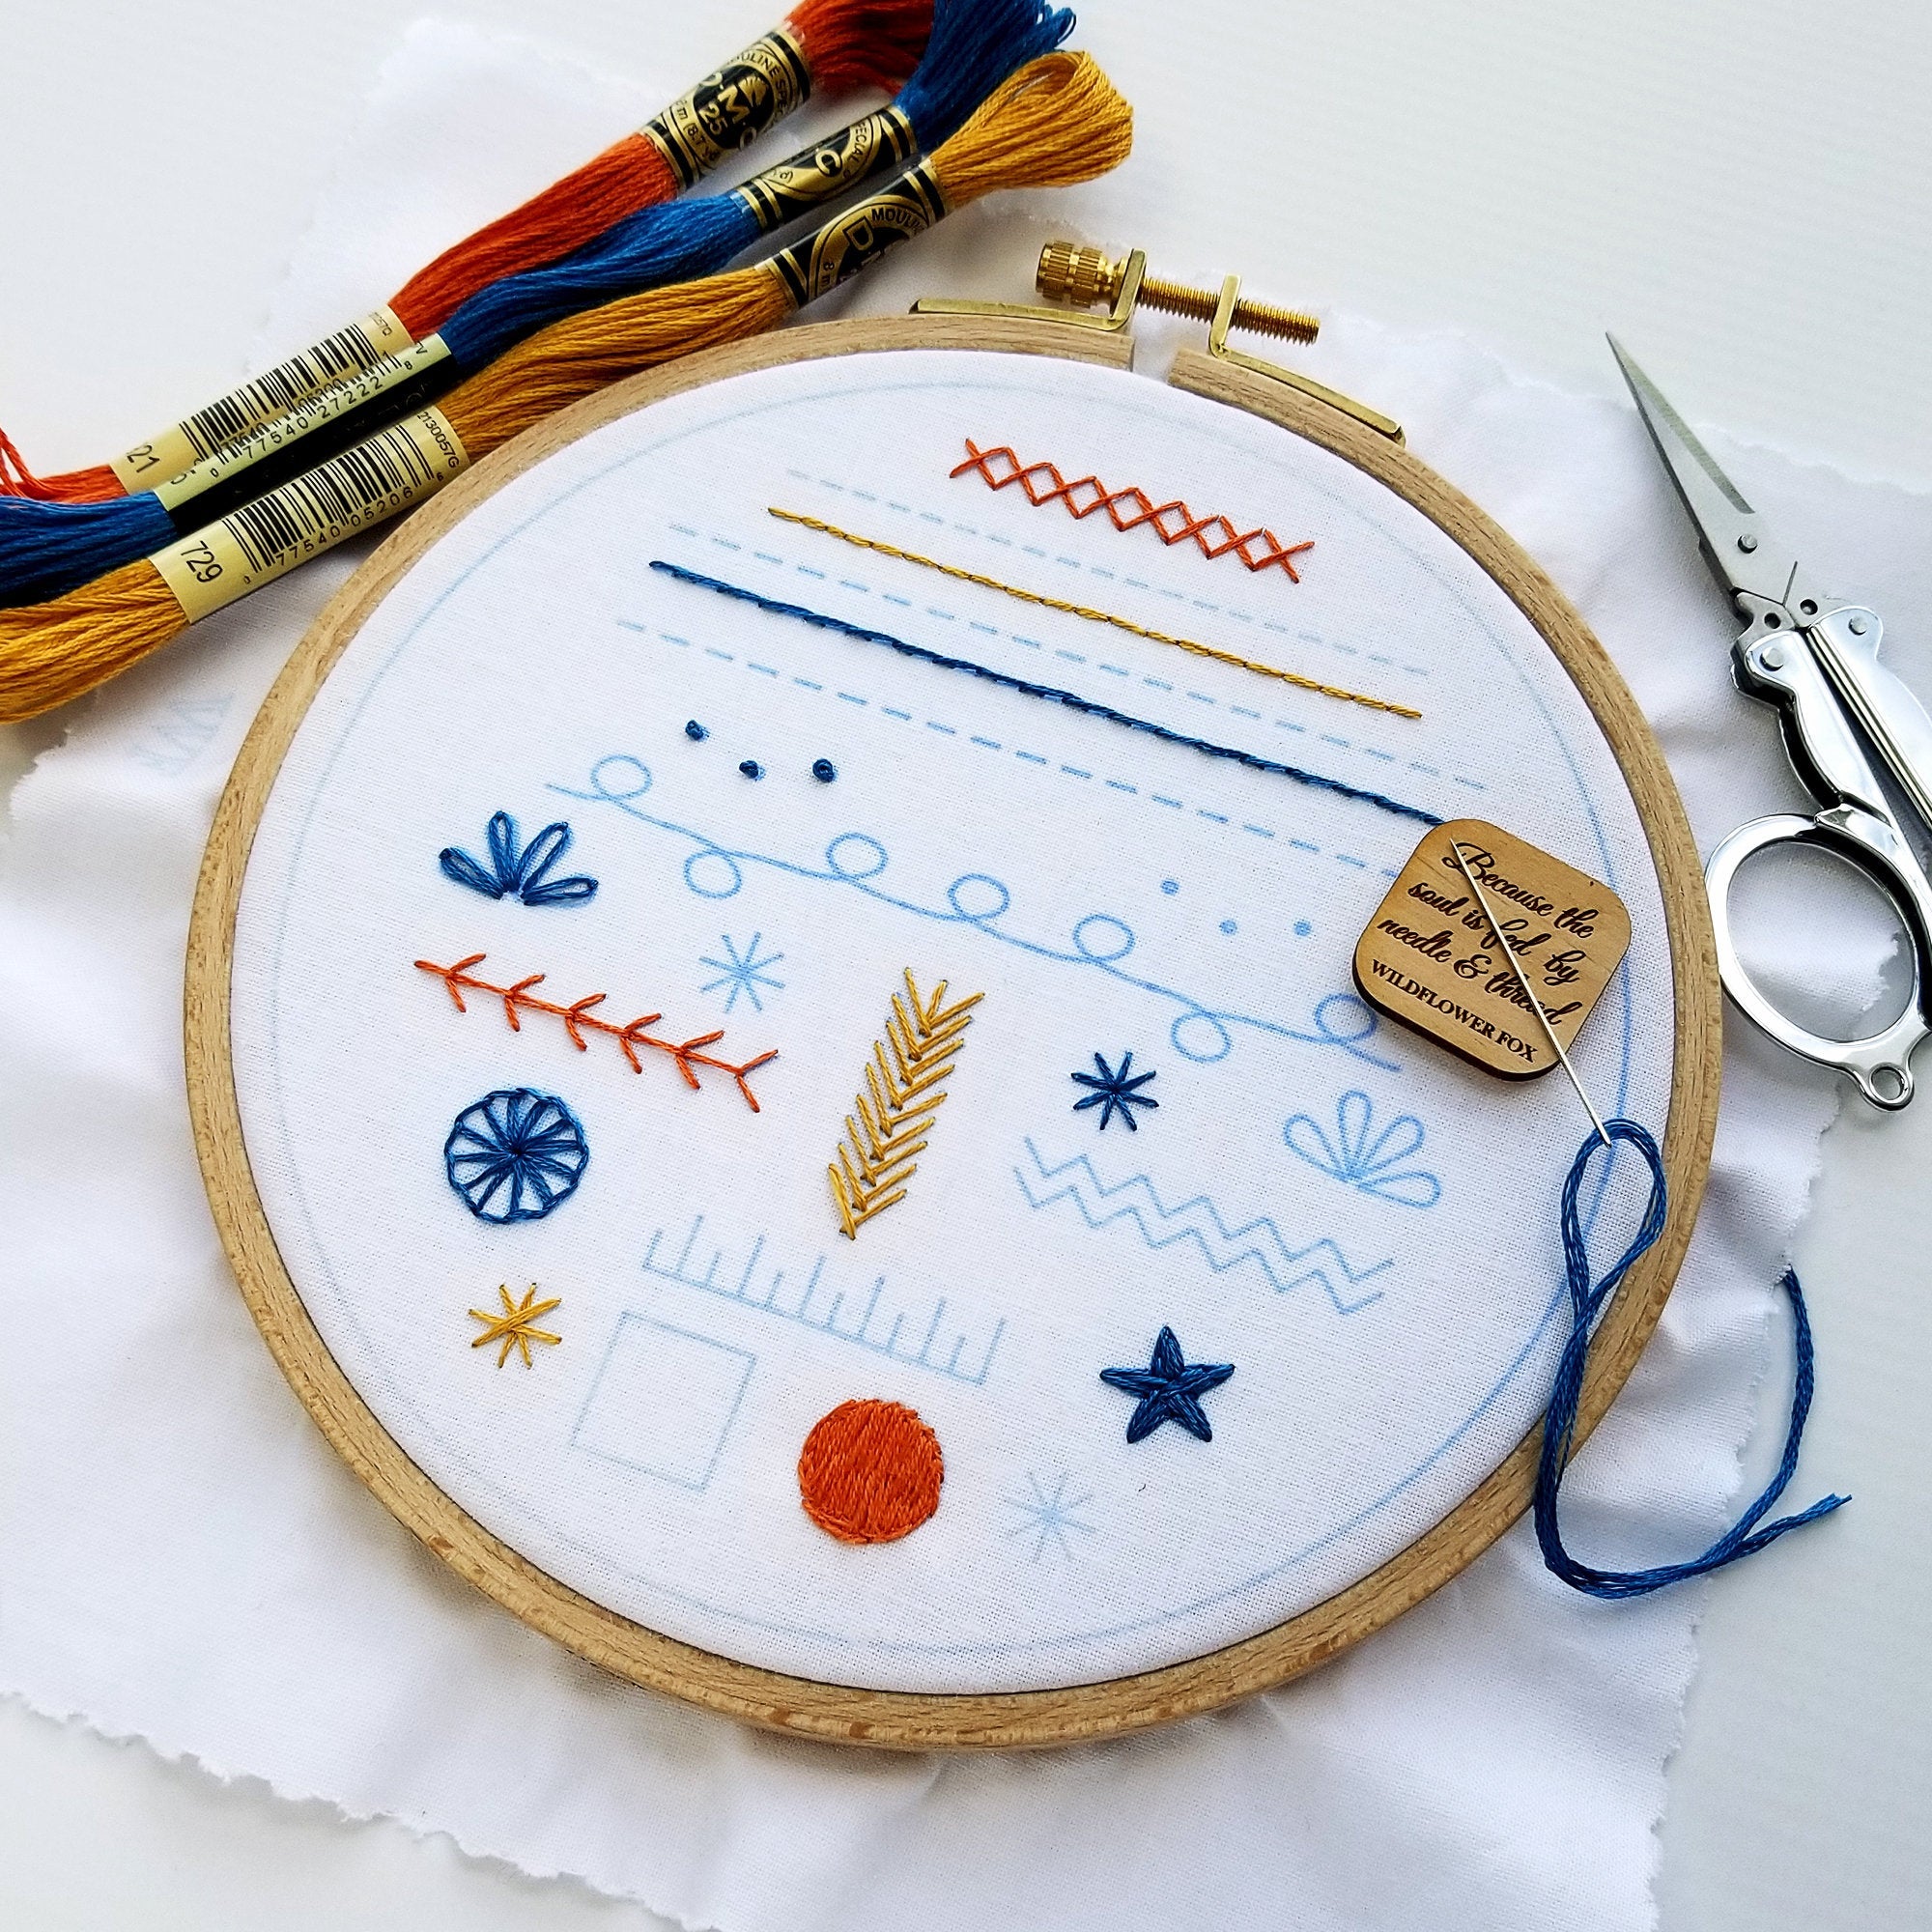 13-Stitch Practice Guide Embroidery Kit